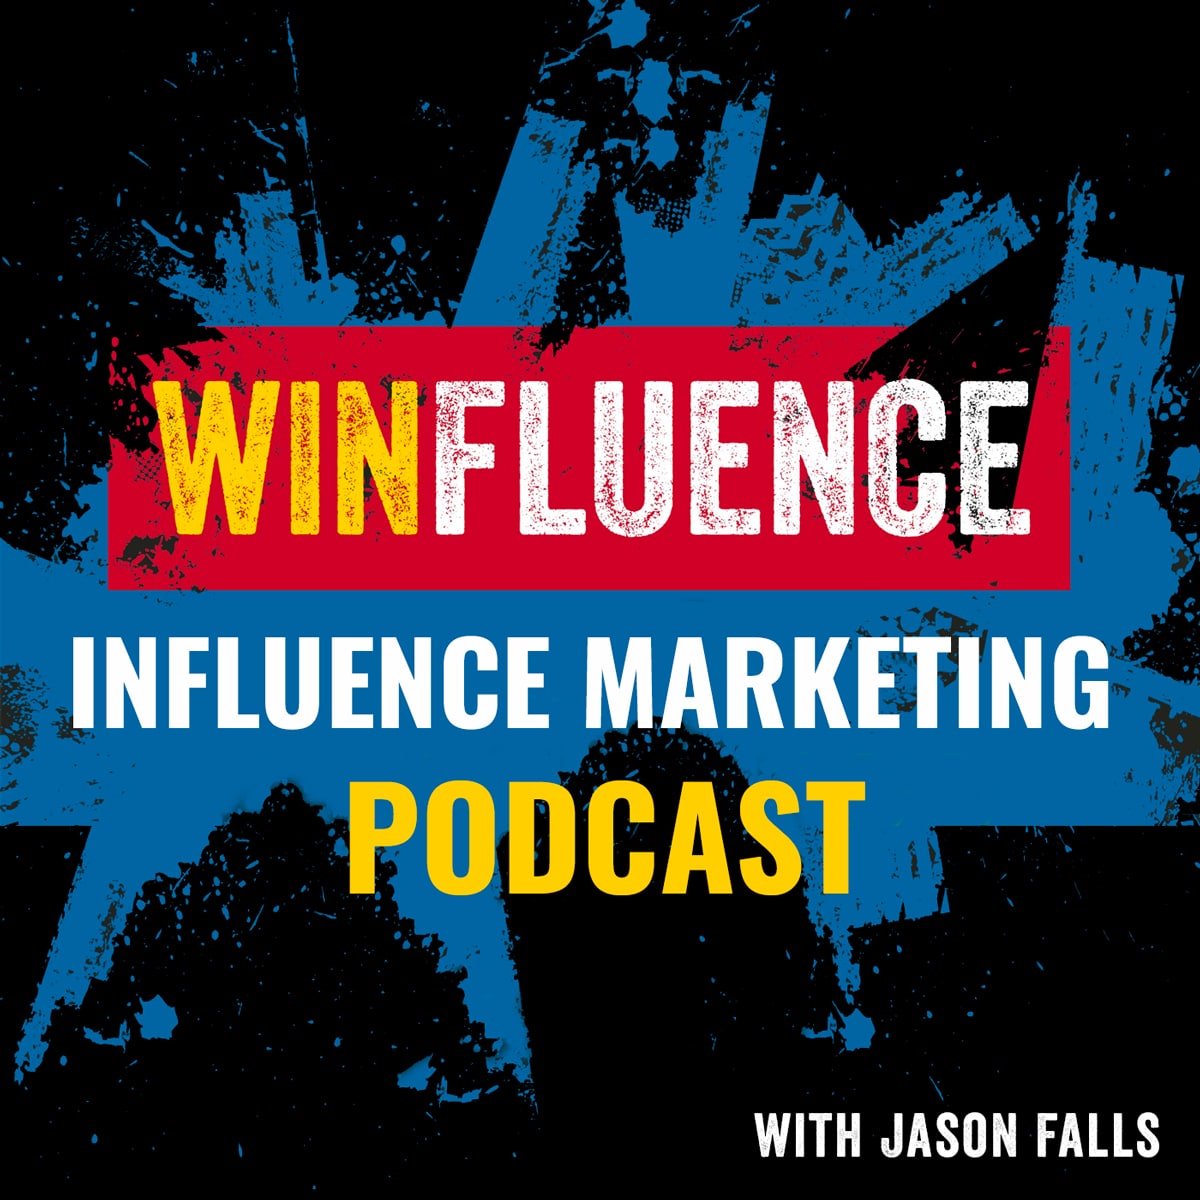 Winfluence - The Influence Marketing Podcast